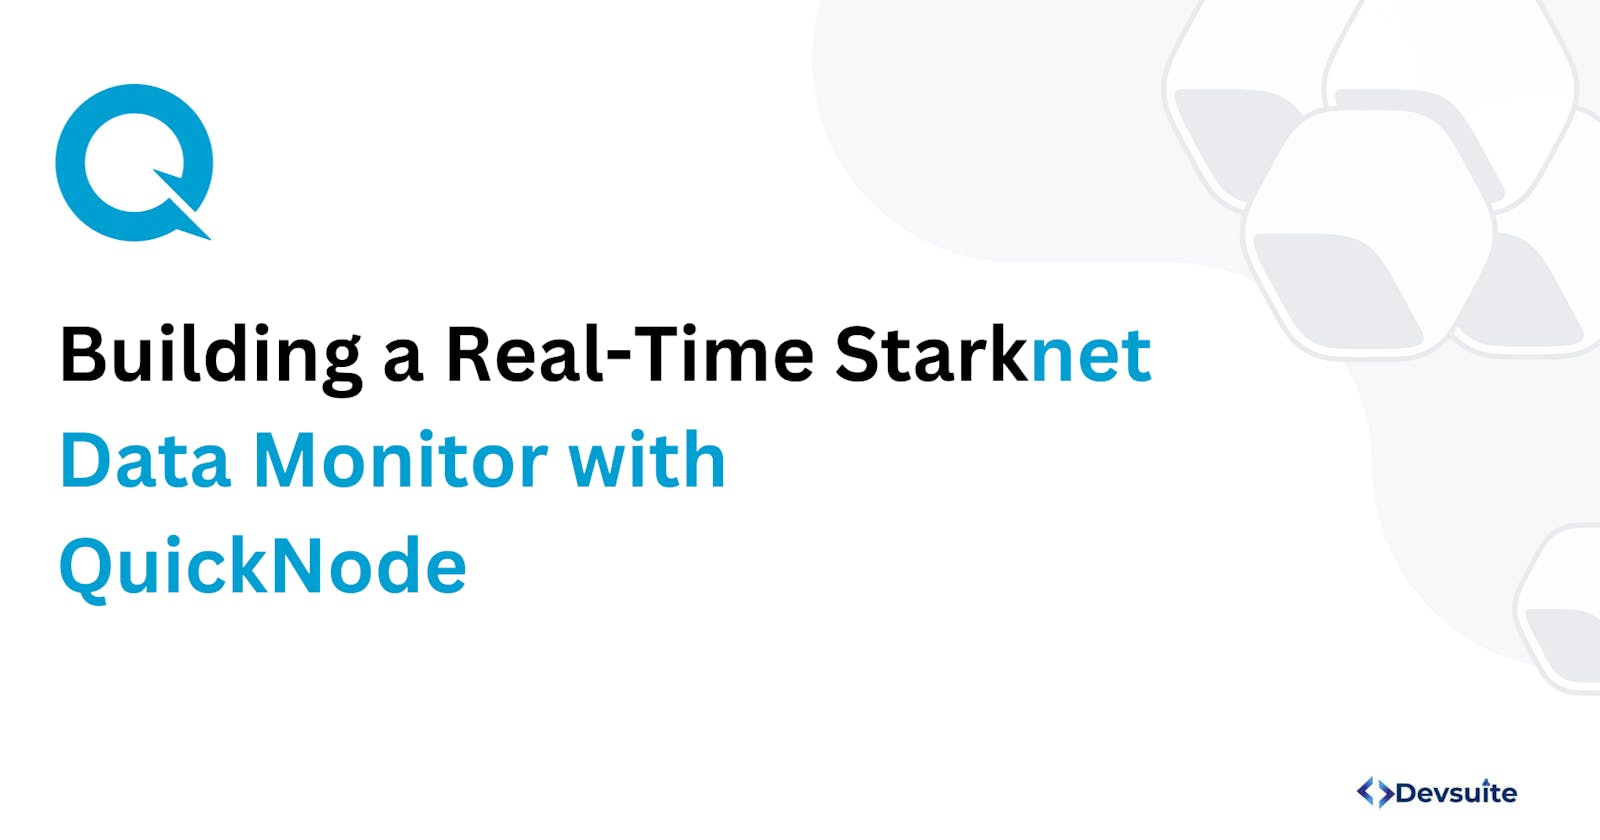 Building a Real-Time Starknet Data Monitor with QuickNode